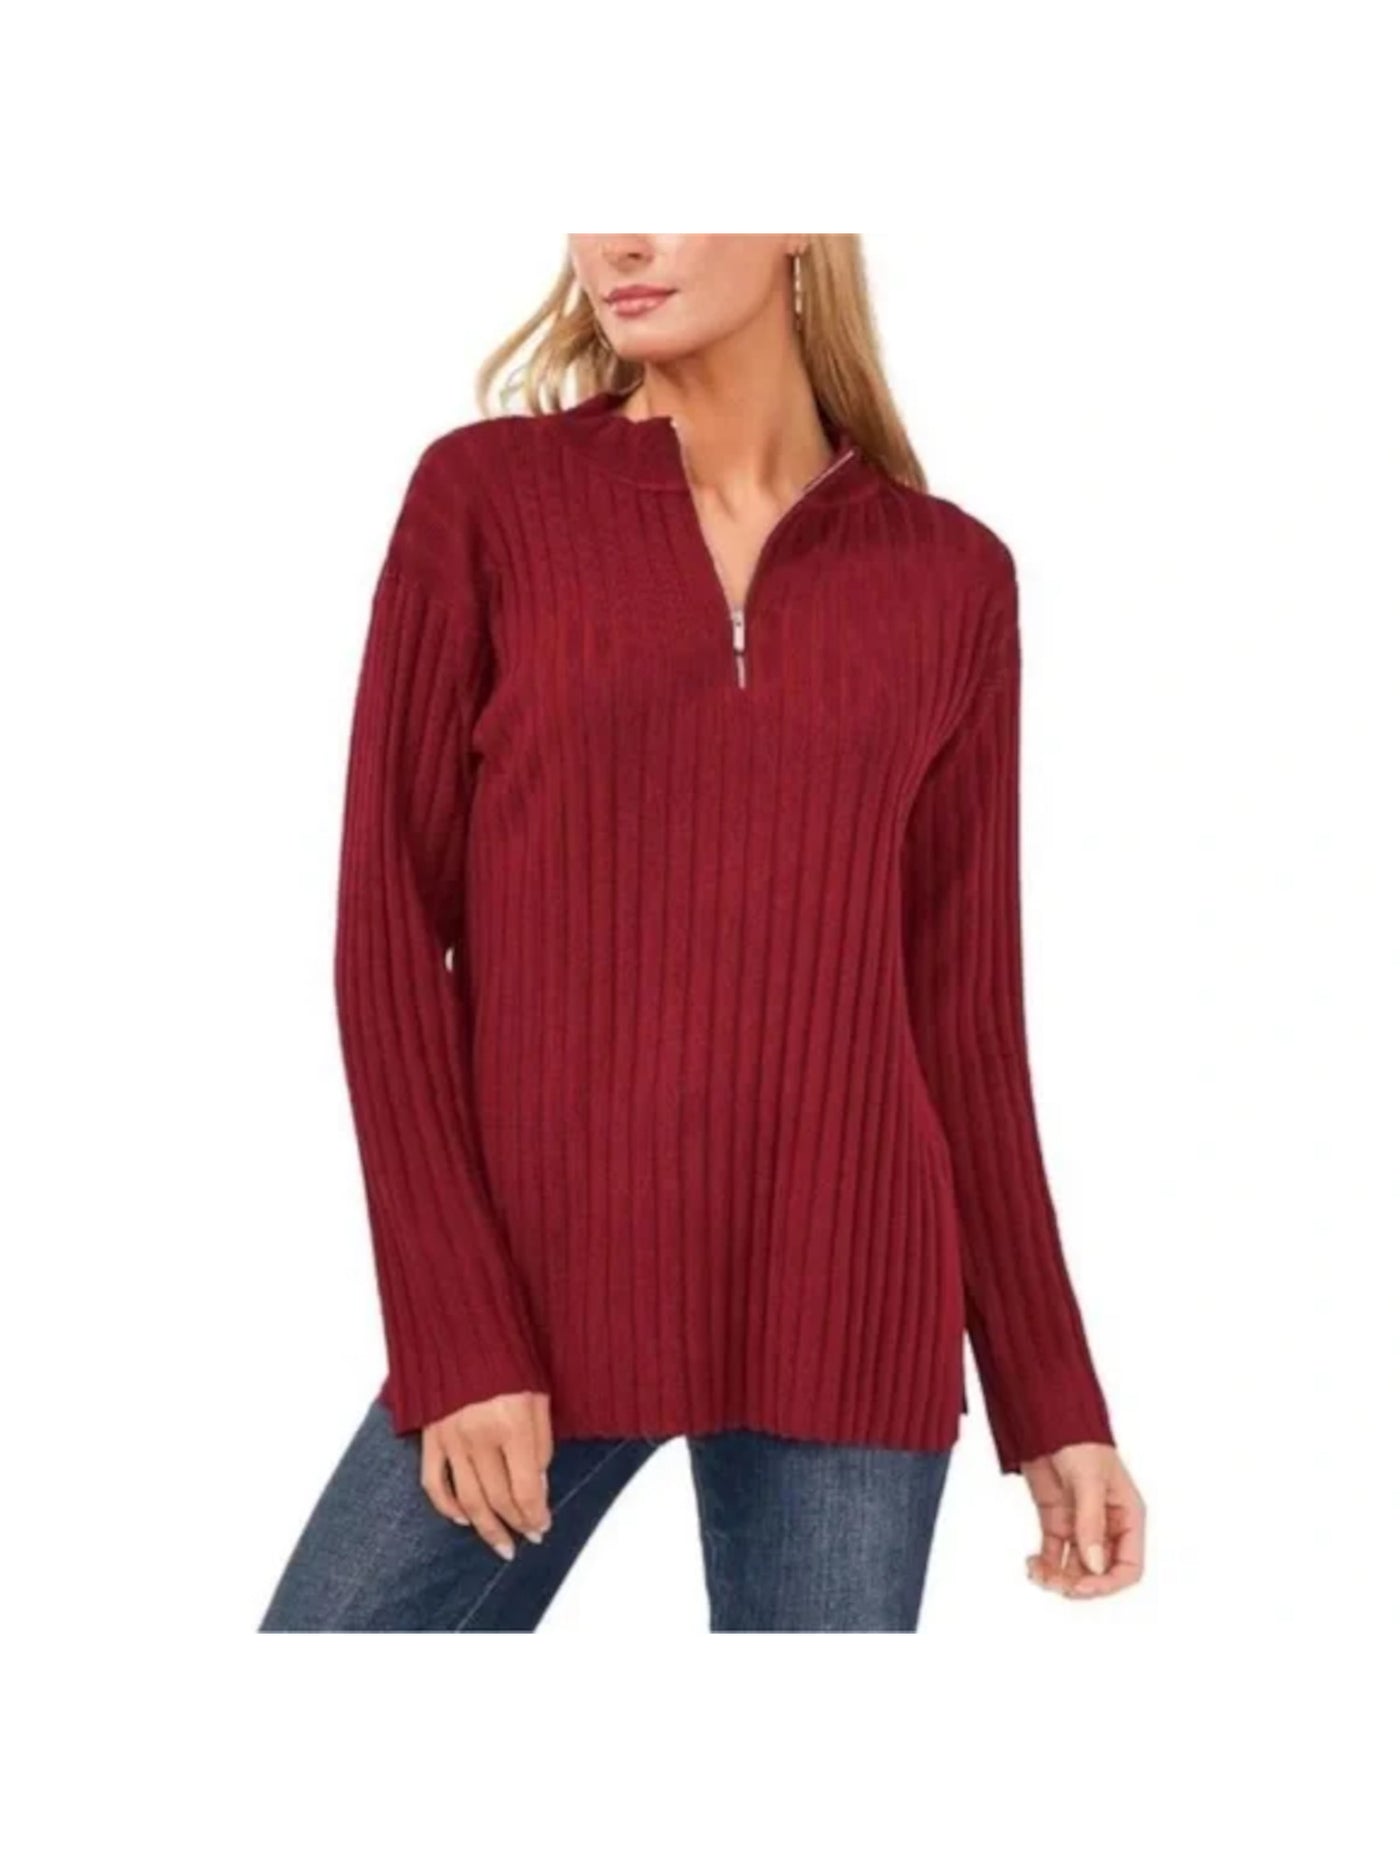 VINCE CAMUTO Womens Maroon Ribbed Quarter Zip Long Sleeve Mock Neck Sweater XL